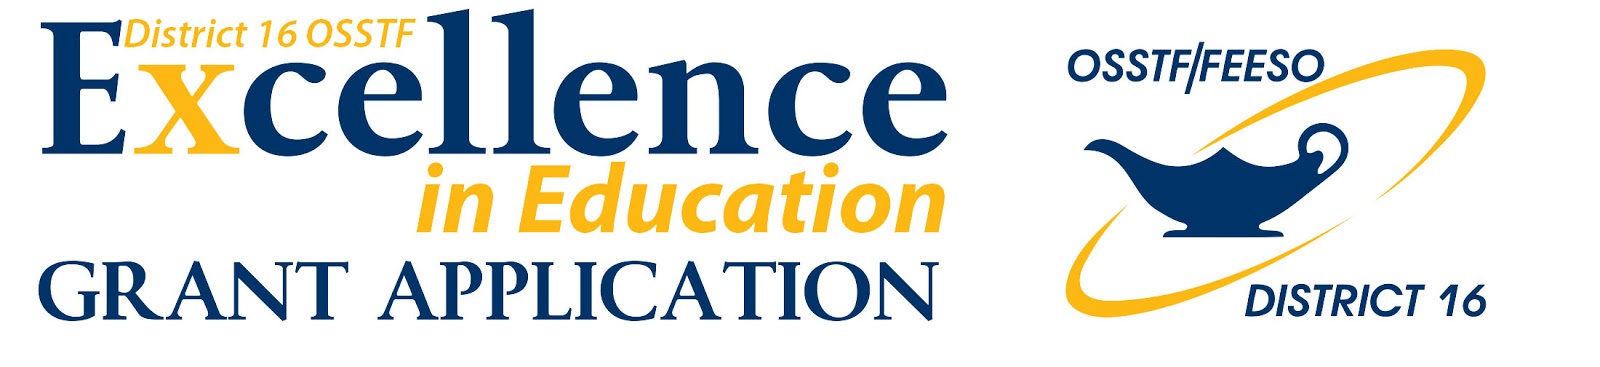 District 16 OSSTF Excellence in Education Grant Application logo